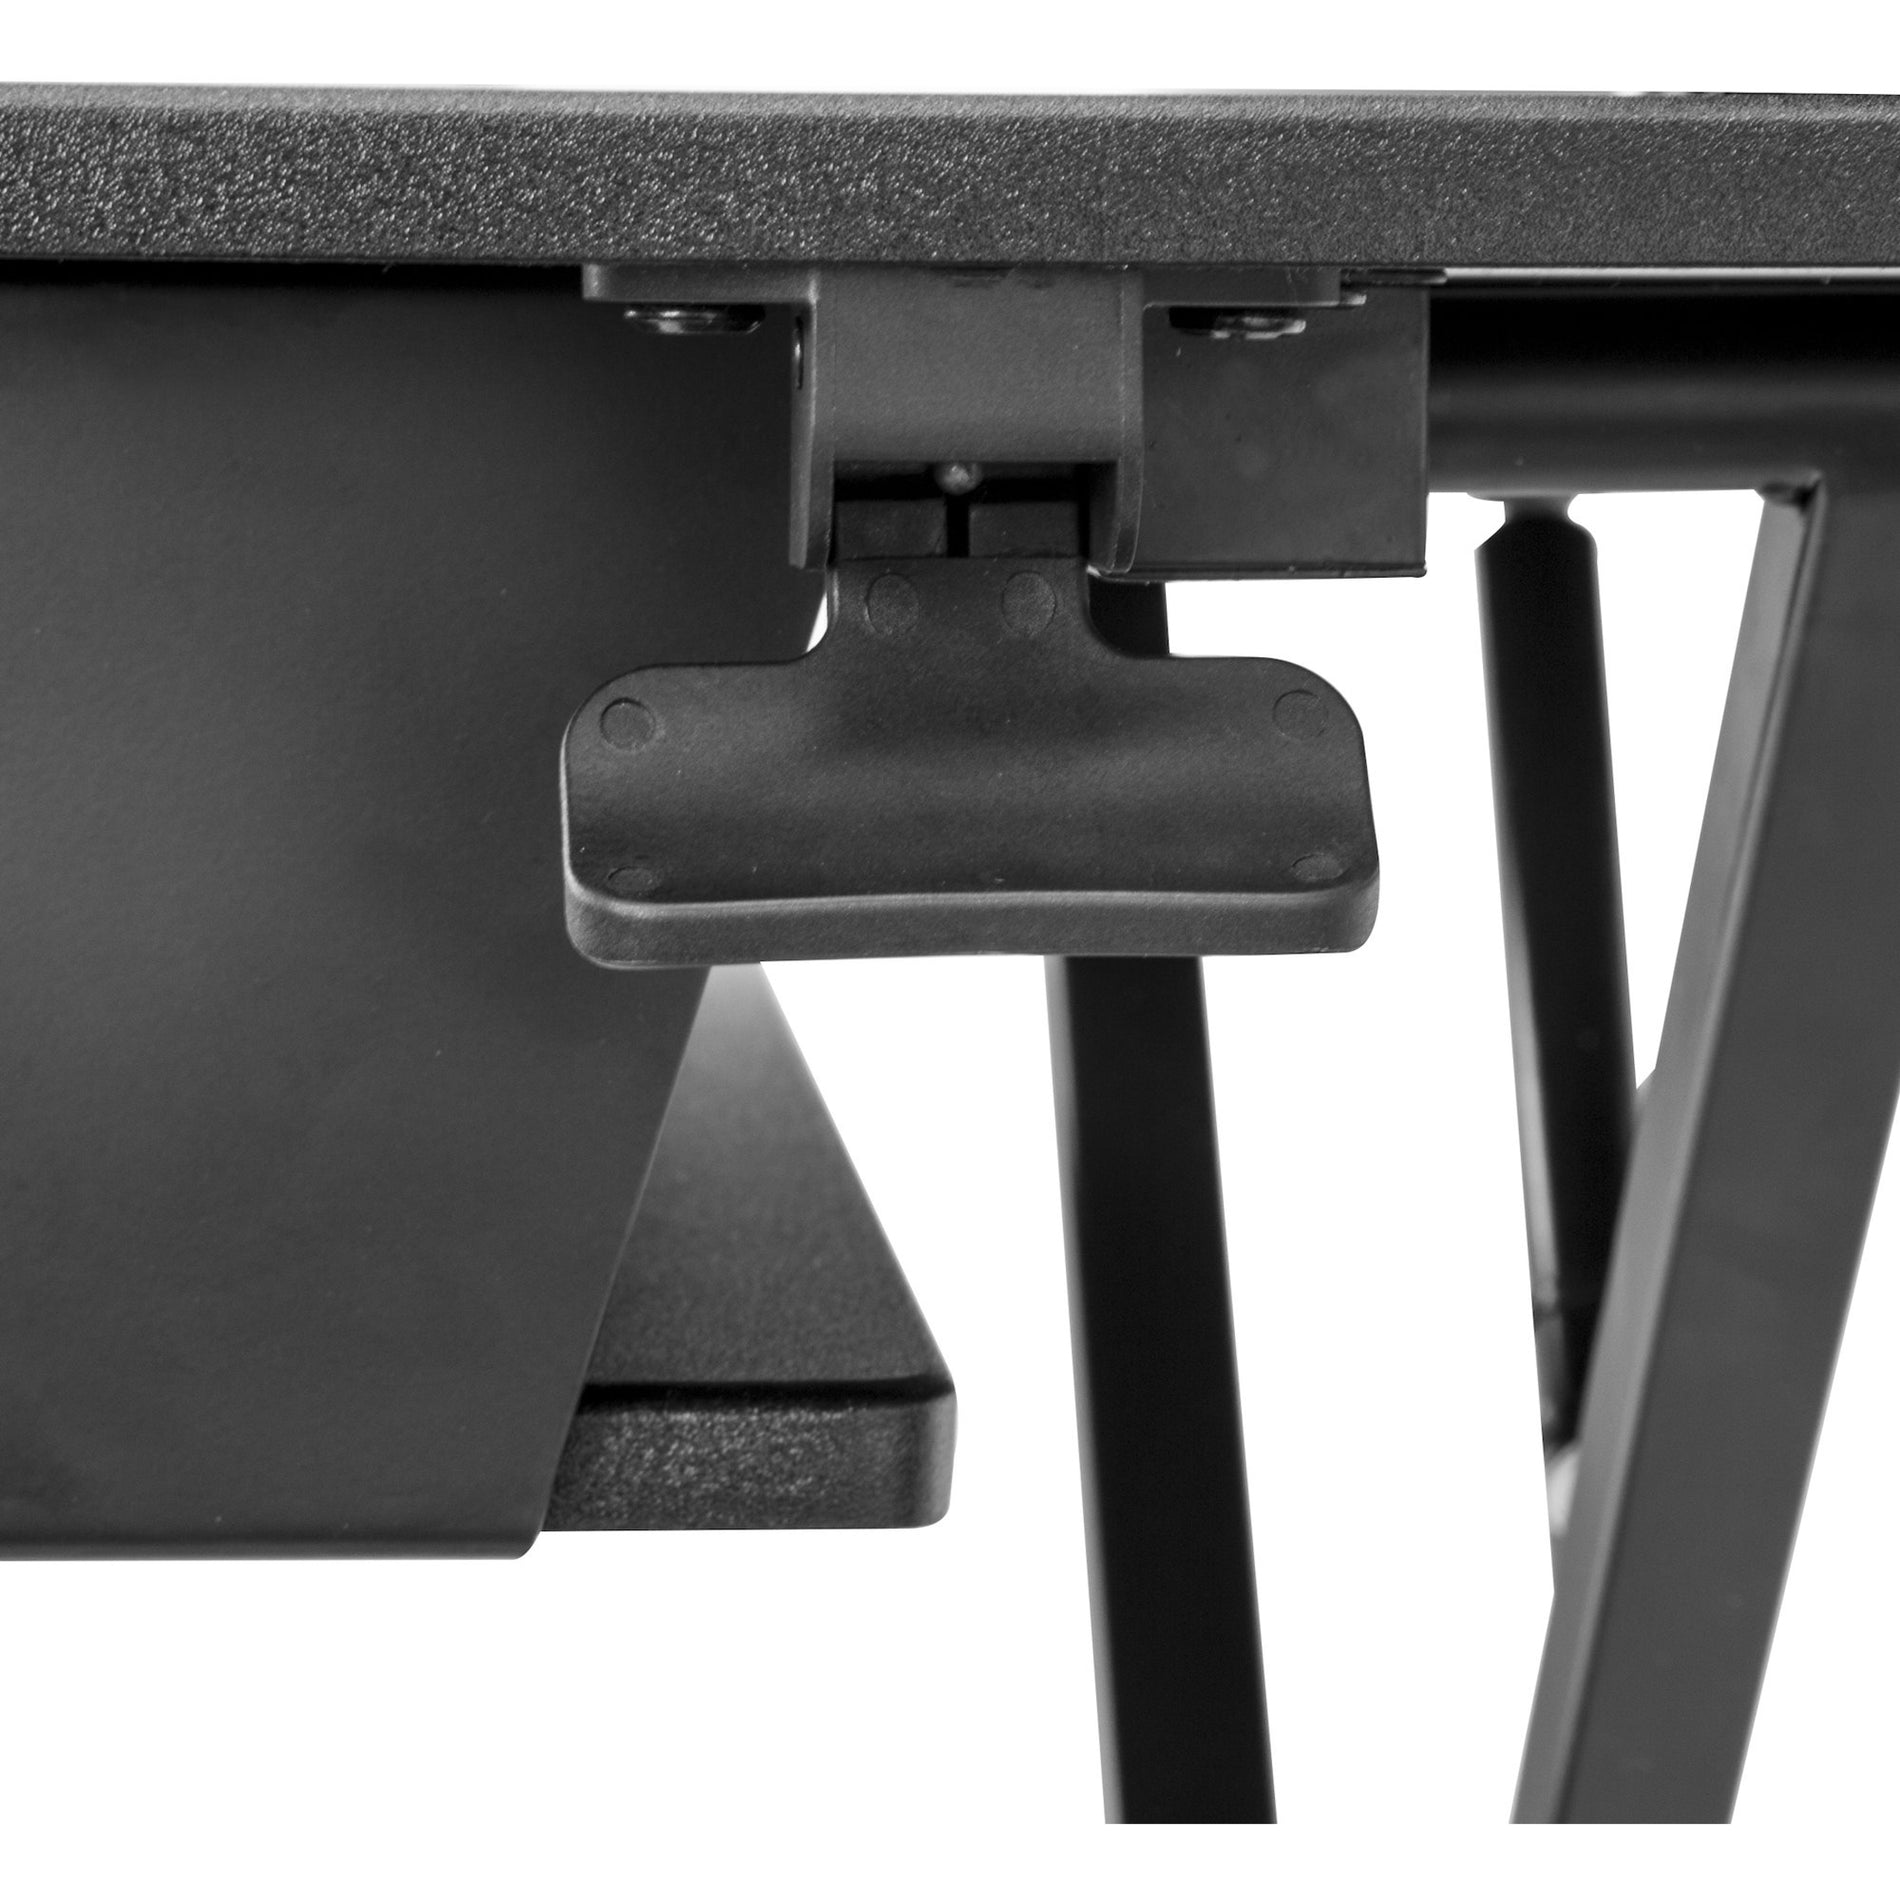 StarTech.com ARMSTSLG Sit-Stand Desk Converter - Large 35in Work Surface, Adjustable Stand up Desk, One-Touch Height Adjustment